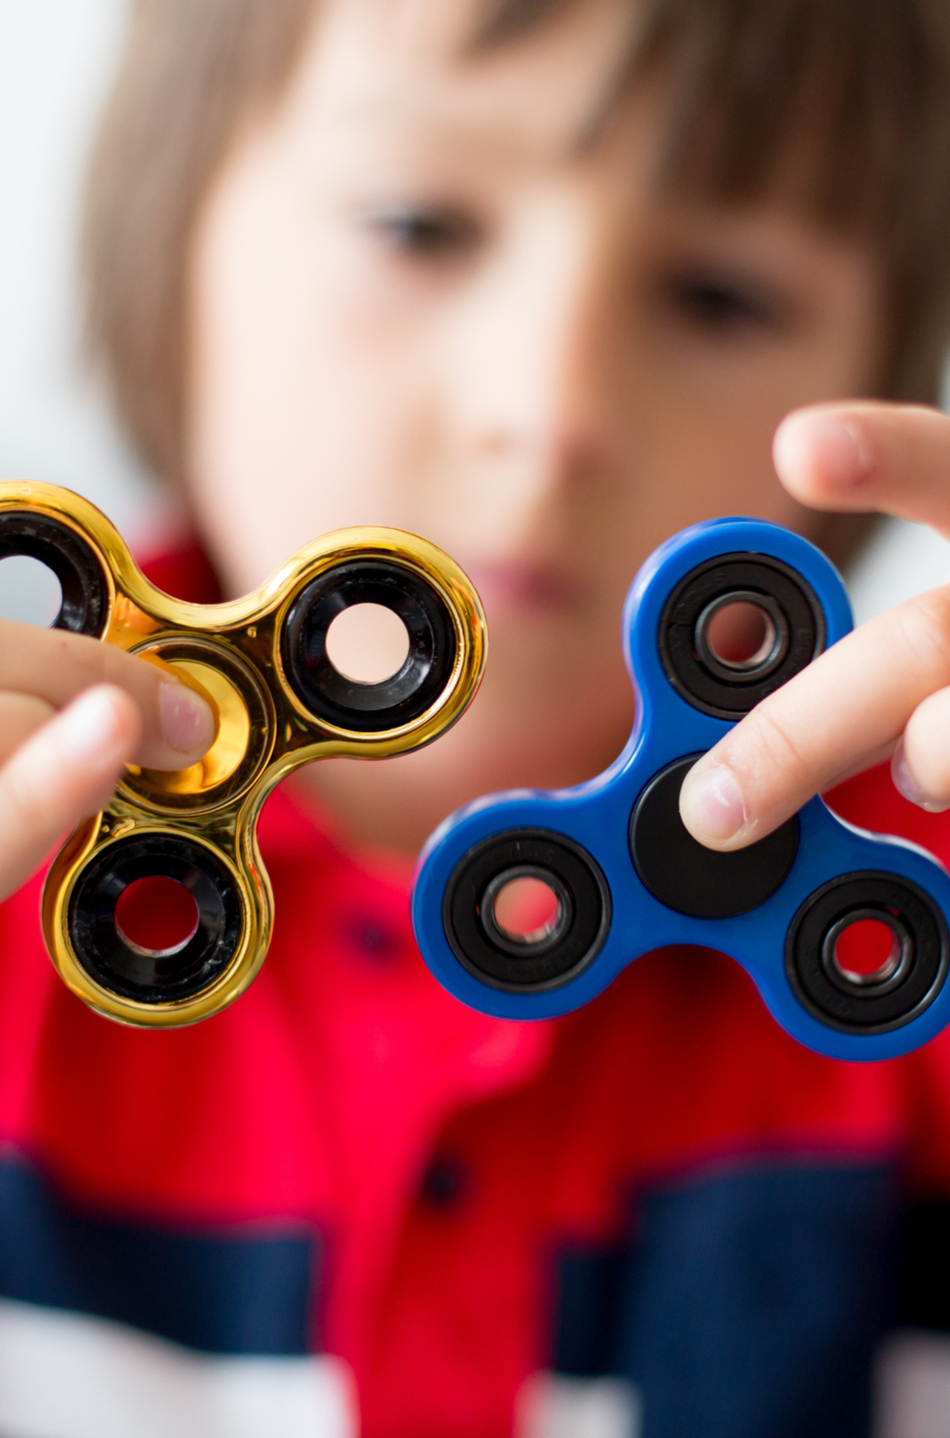 Can Fidget Spinners Really Stop Fidgeting?